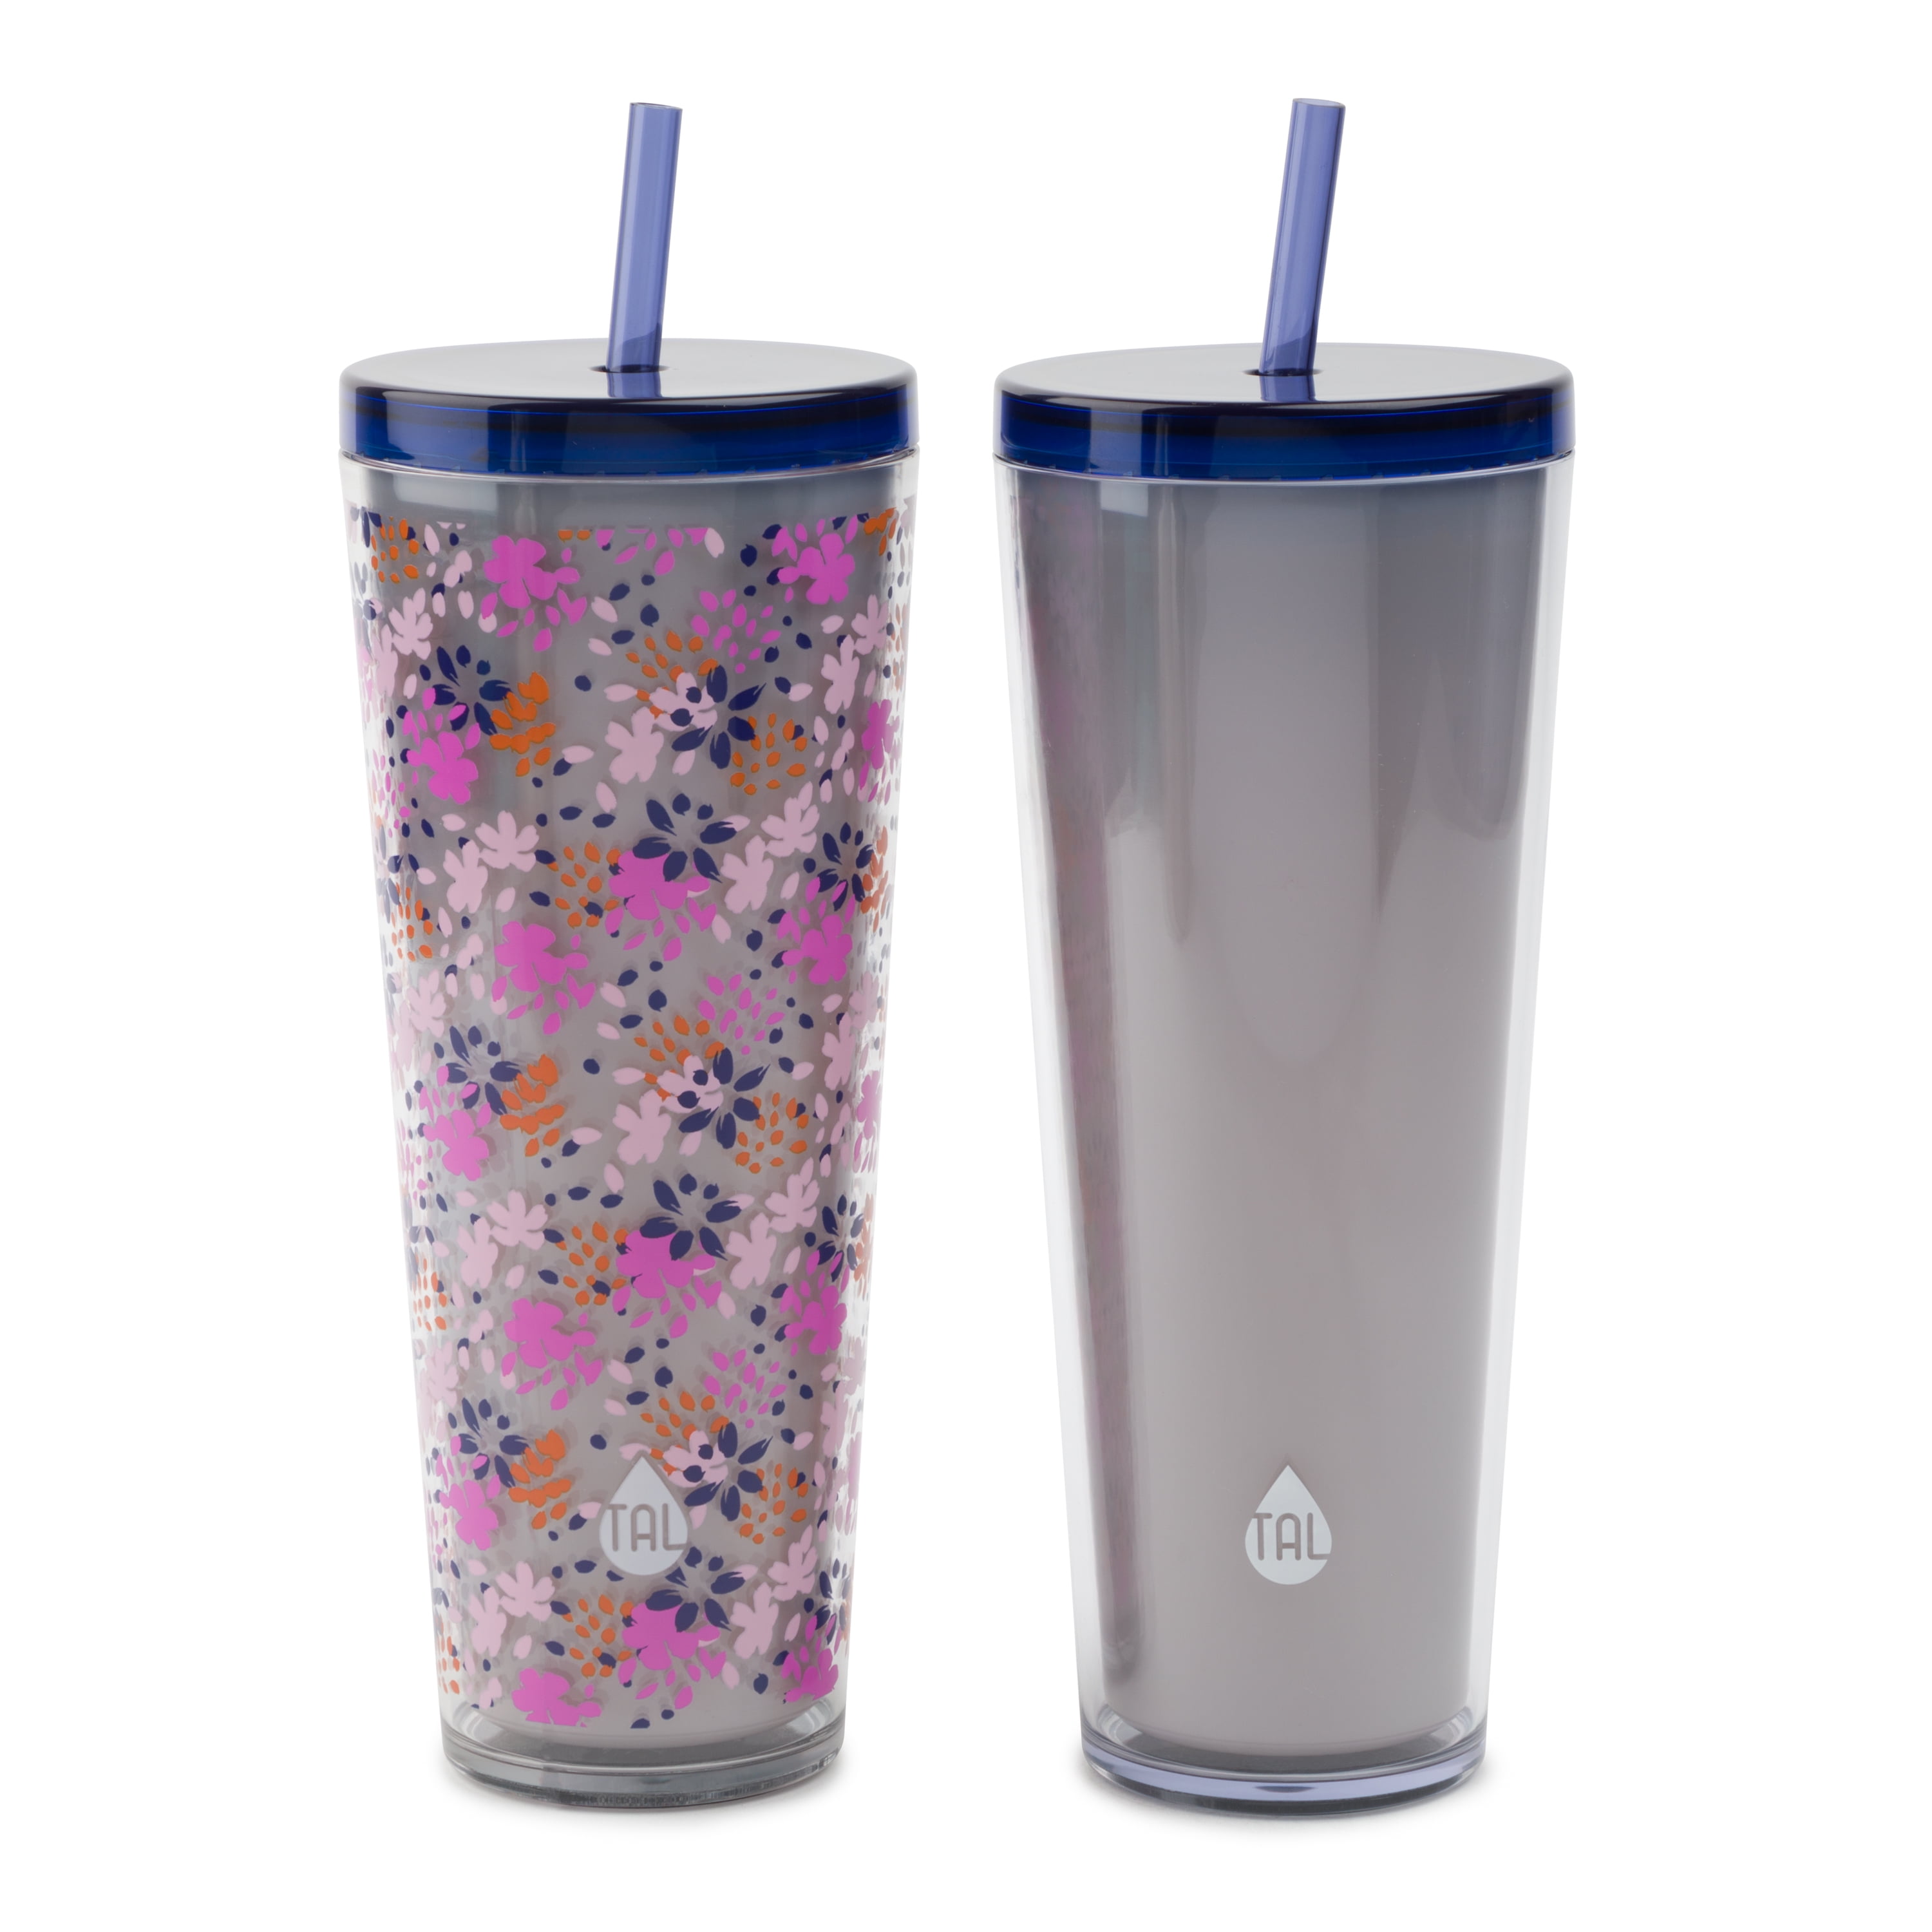 THE RETRO TUMBLER STRAW COVER- 2 COLORS – Pink Desert